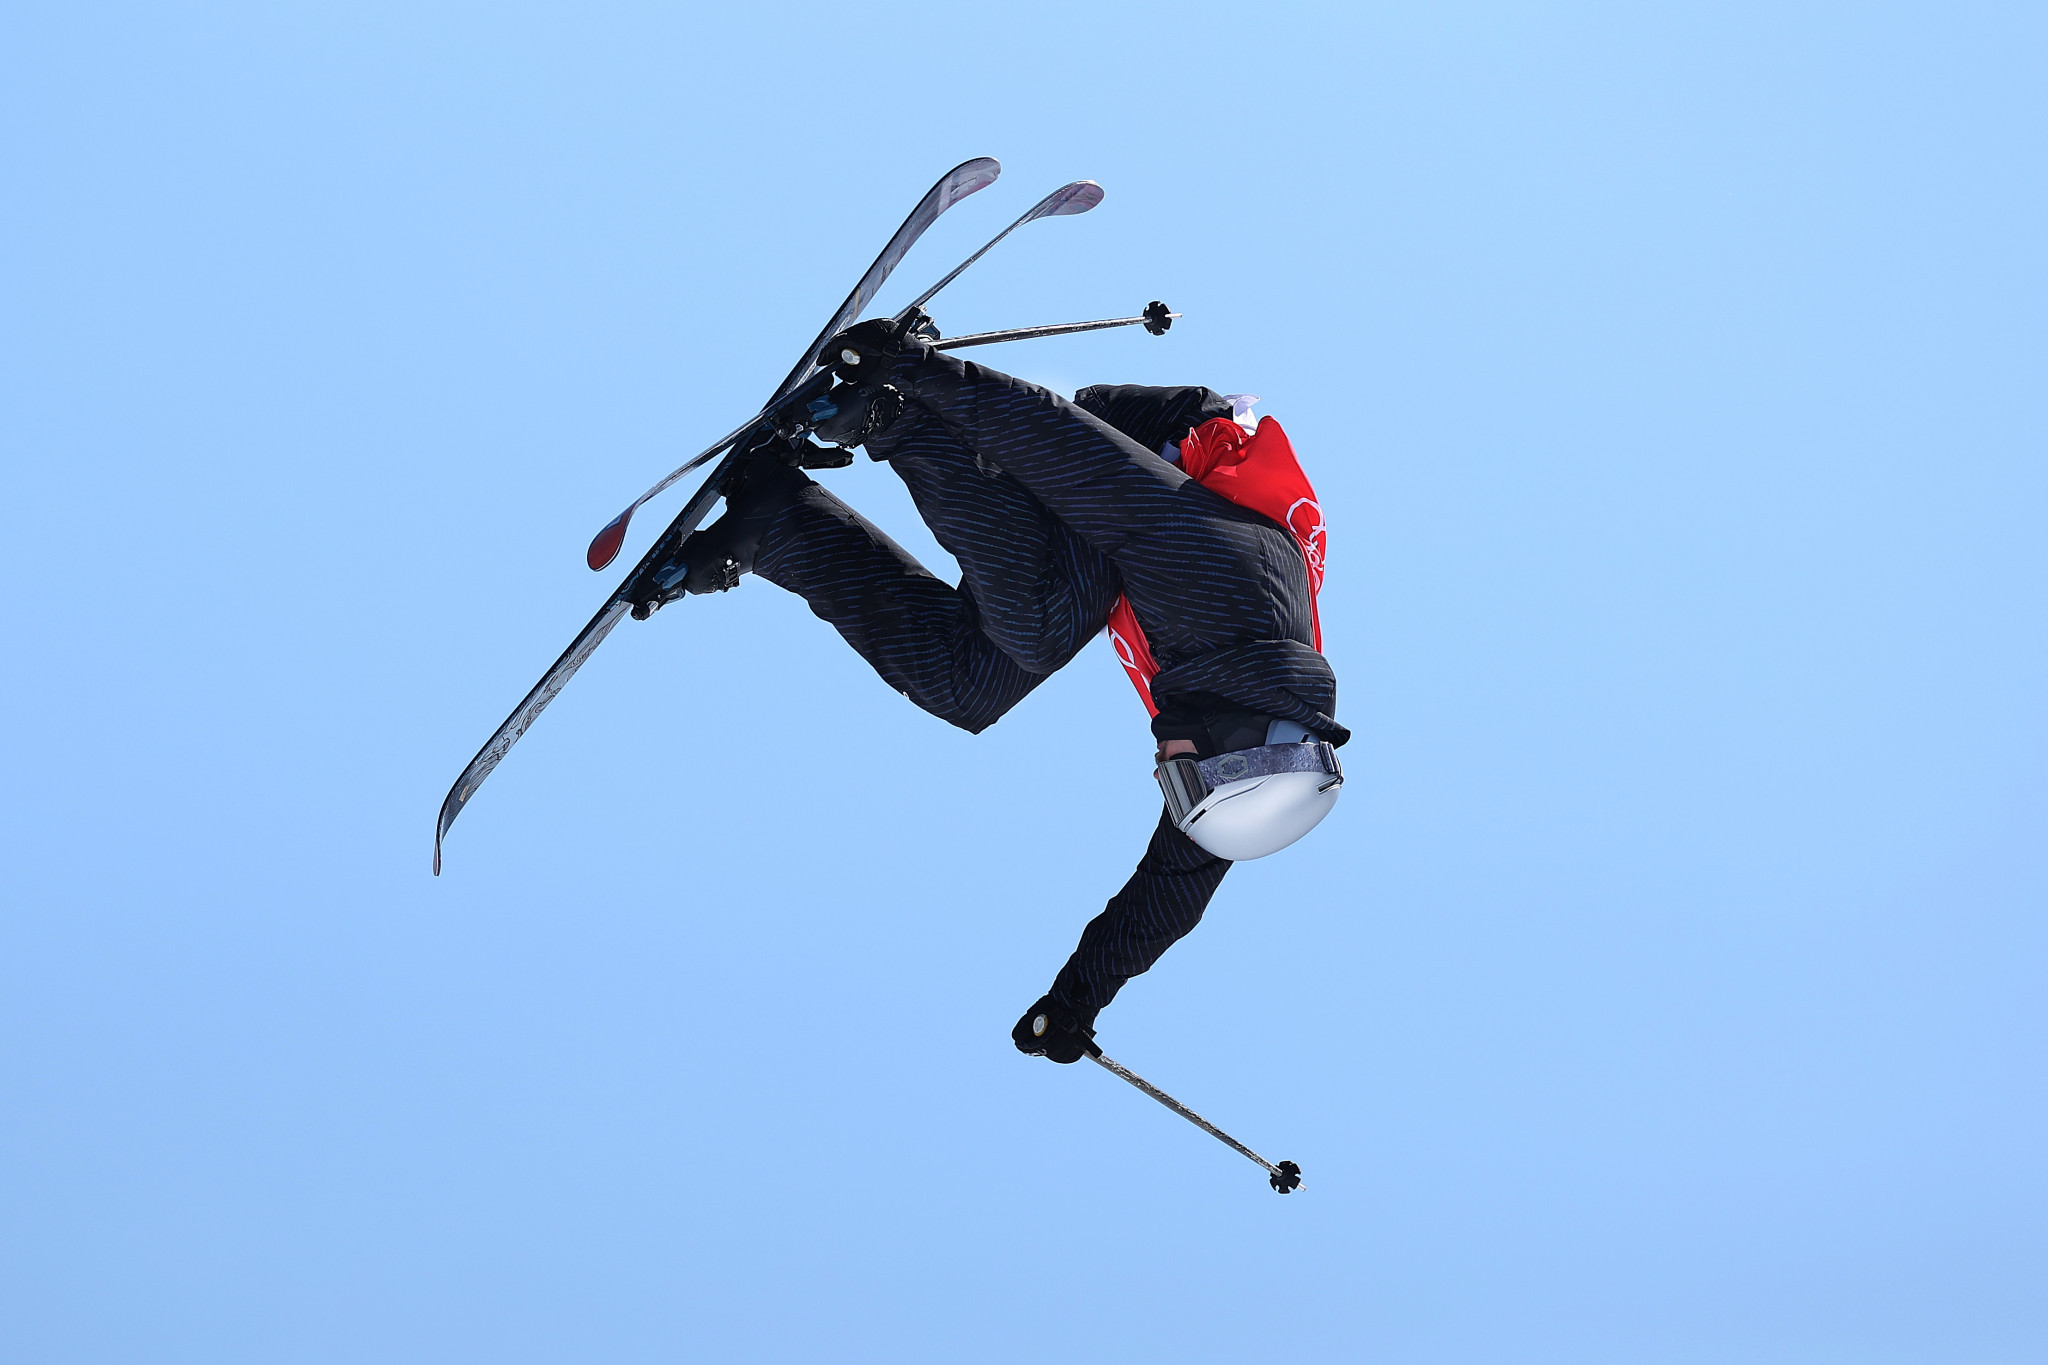 Qualification at Slopestyle World Cups in Bakuriani postponed due to weather